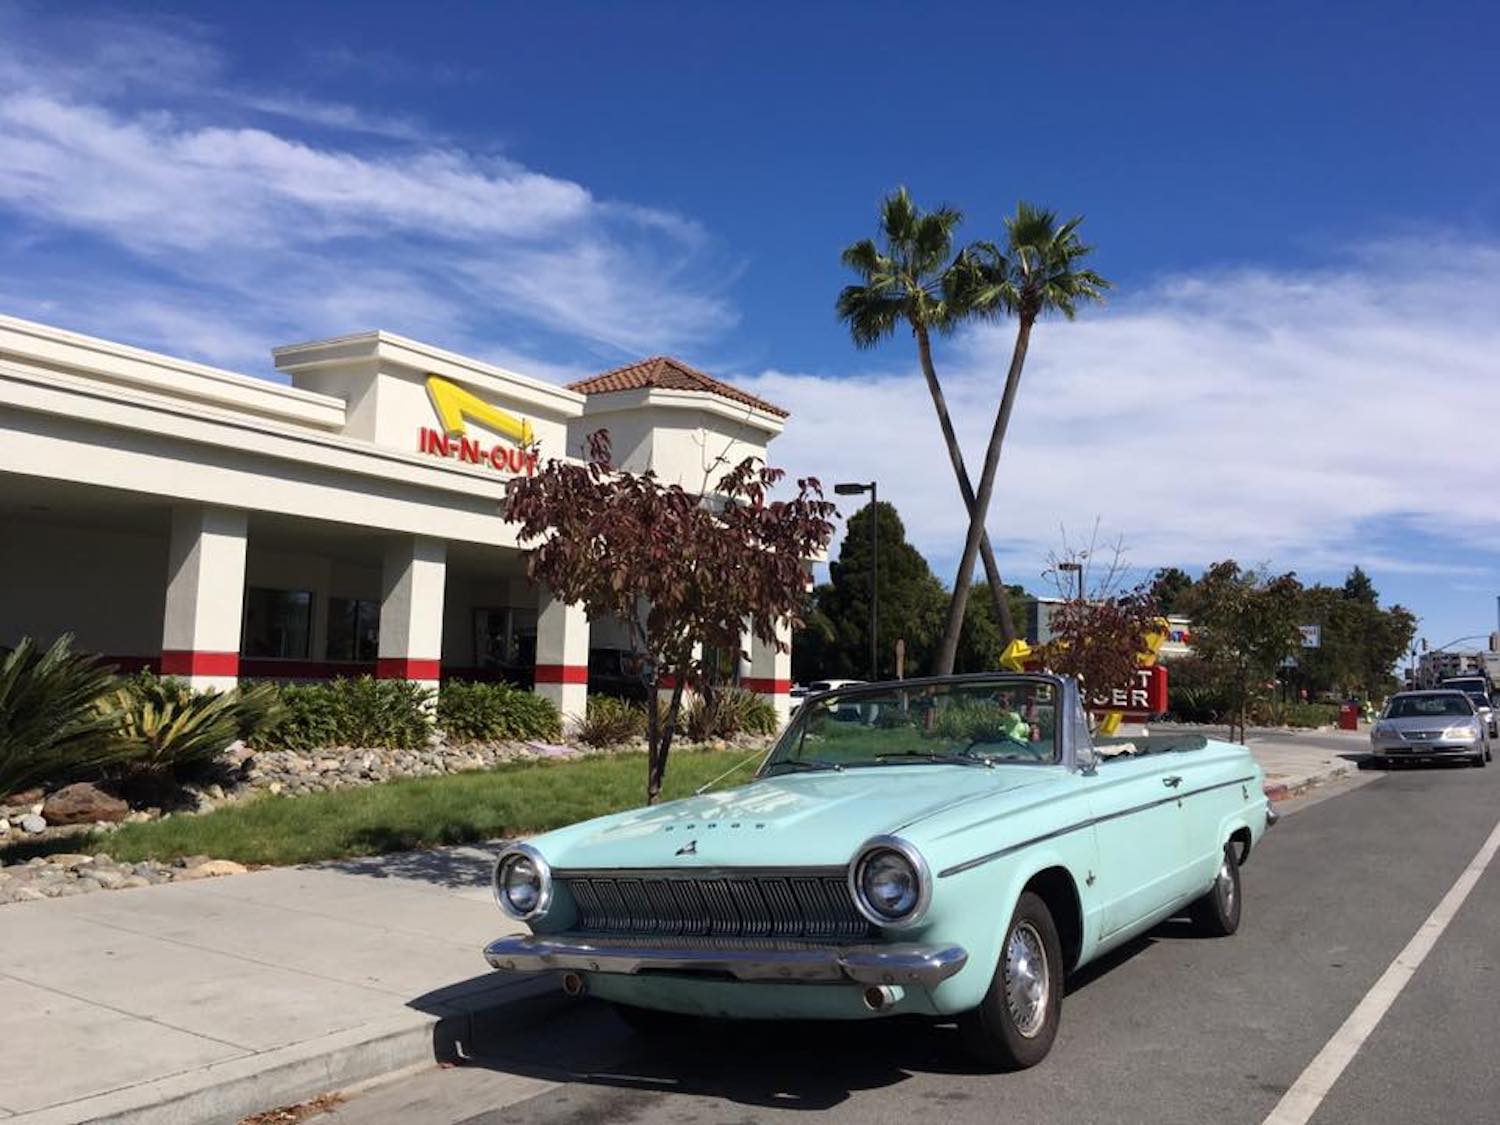 Blue convertible parked in front of palm trees and an In-N-Out burger.